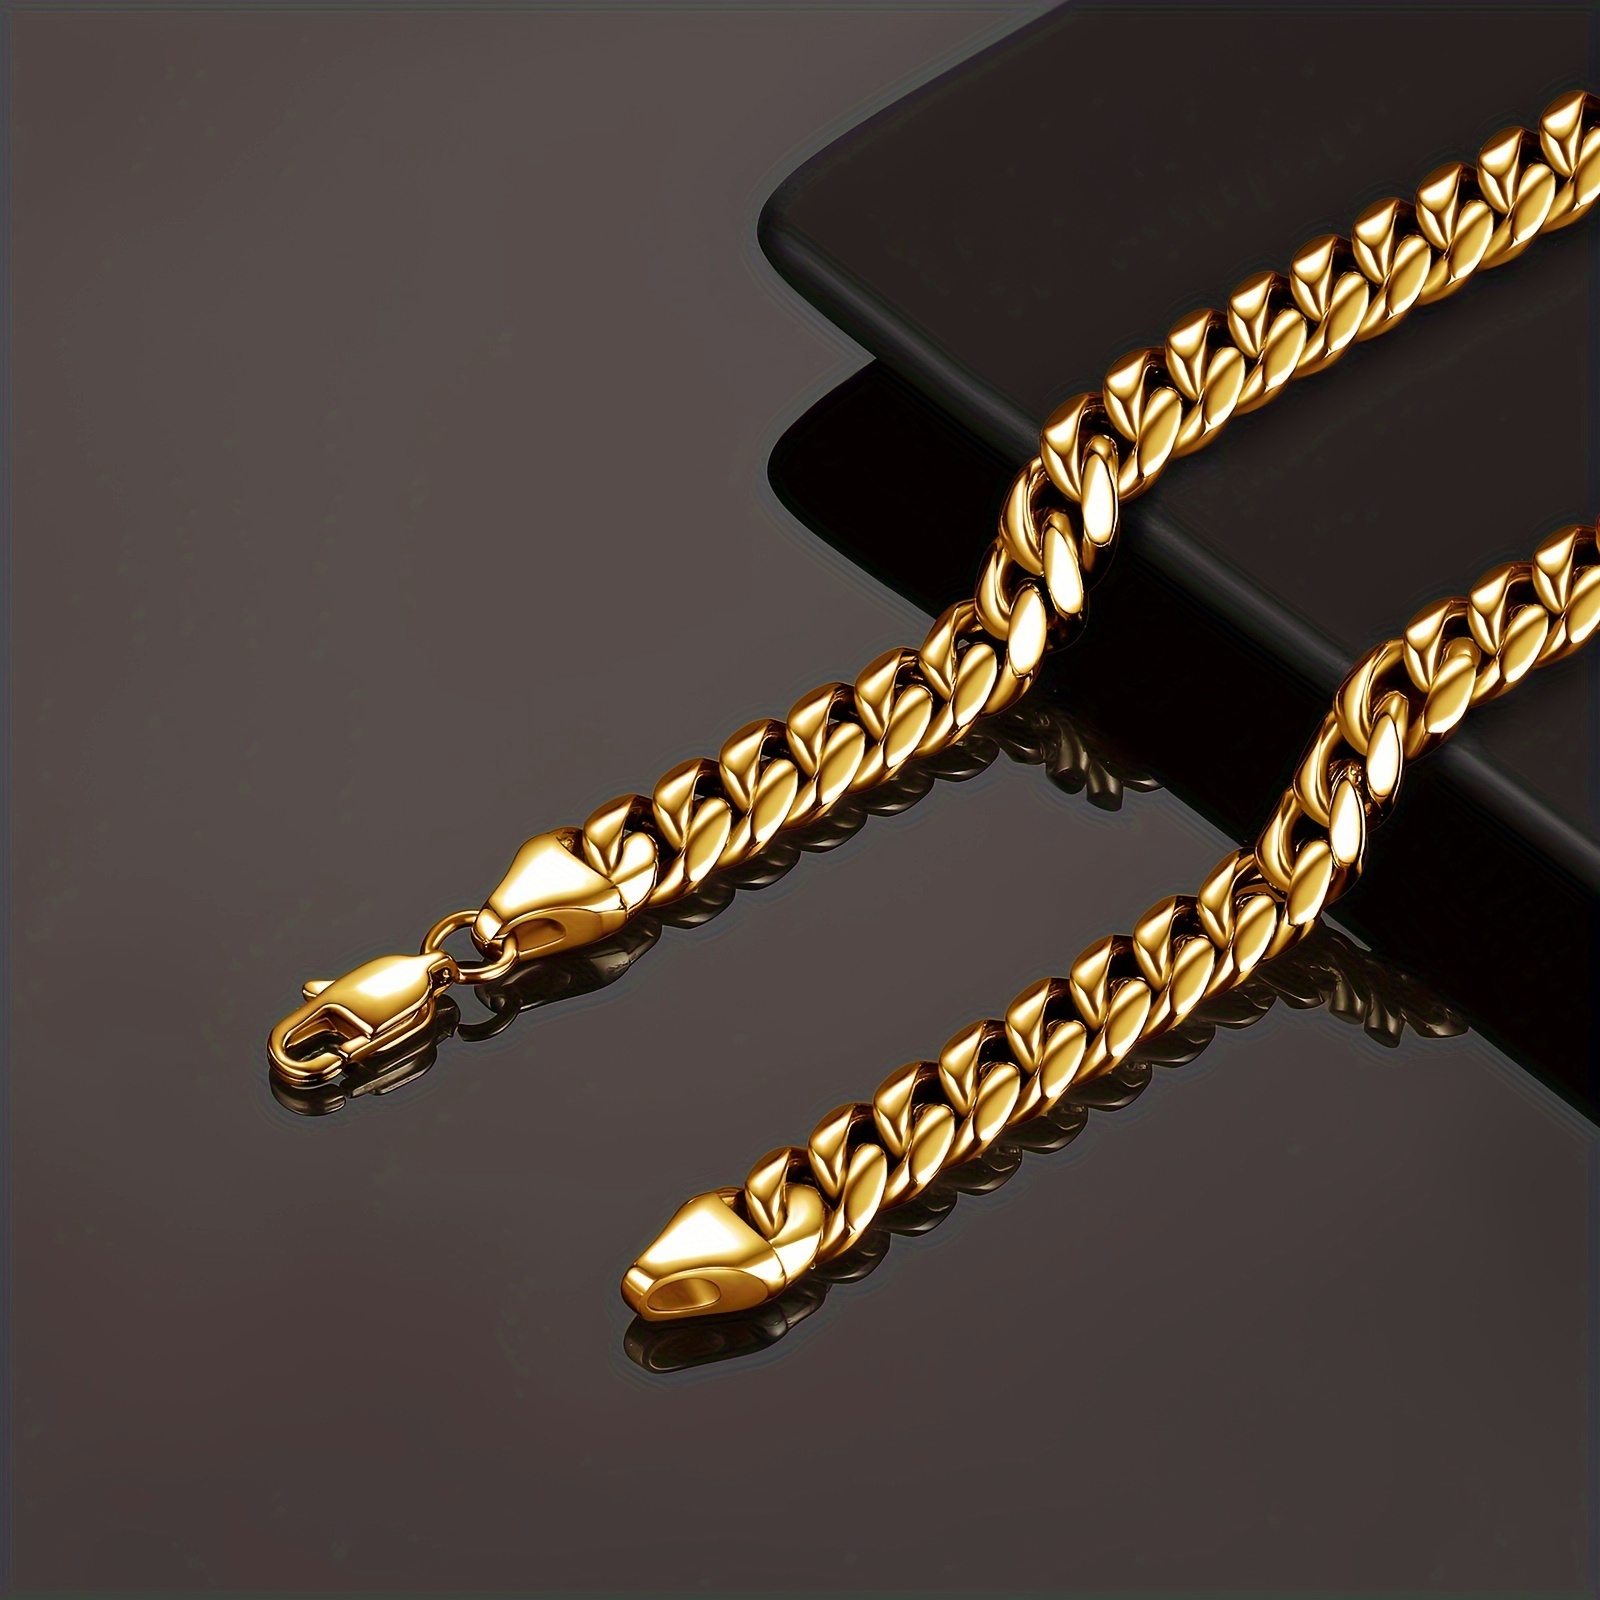 

Mens Stainless Steel Cuban Chain Fashion Golden Necklace